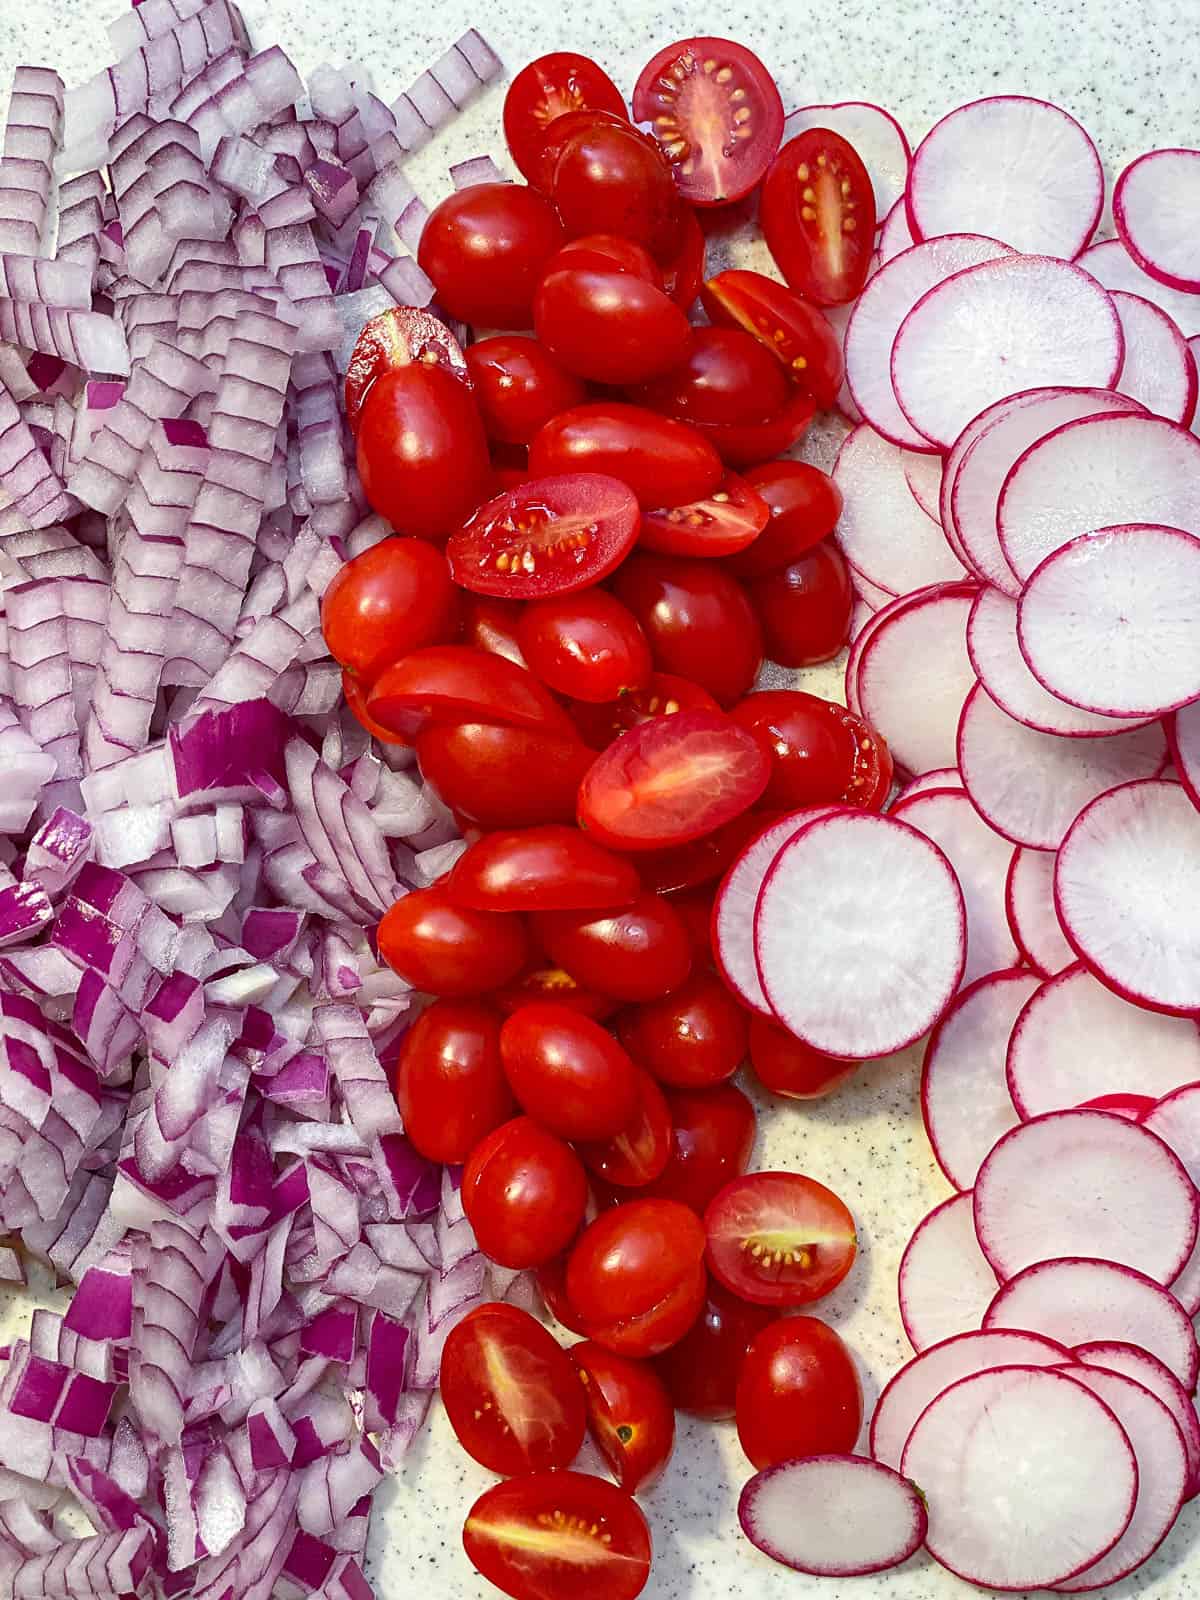 Diced red onion next to halved cherry tomatoes that are next to sliced radishes.